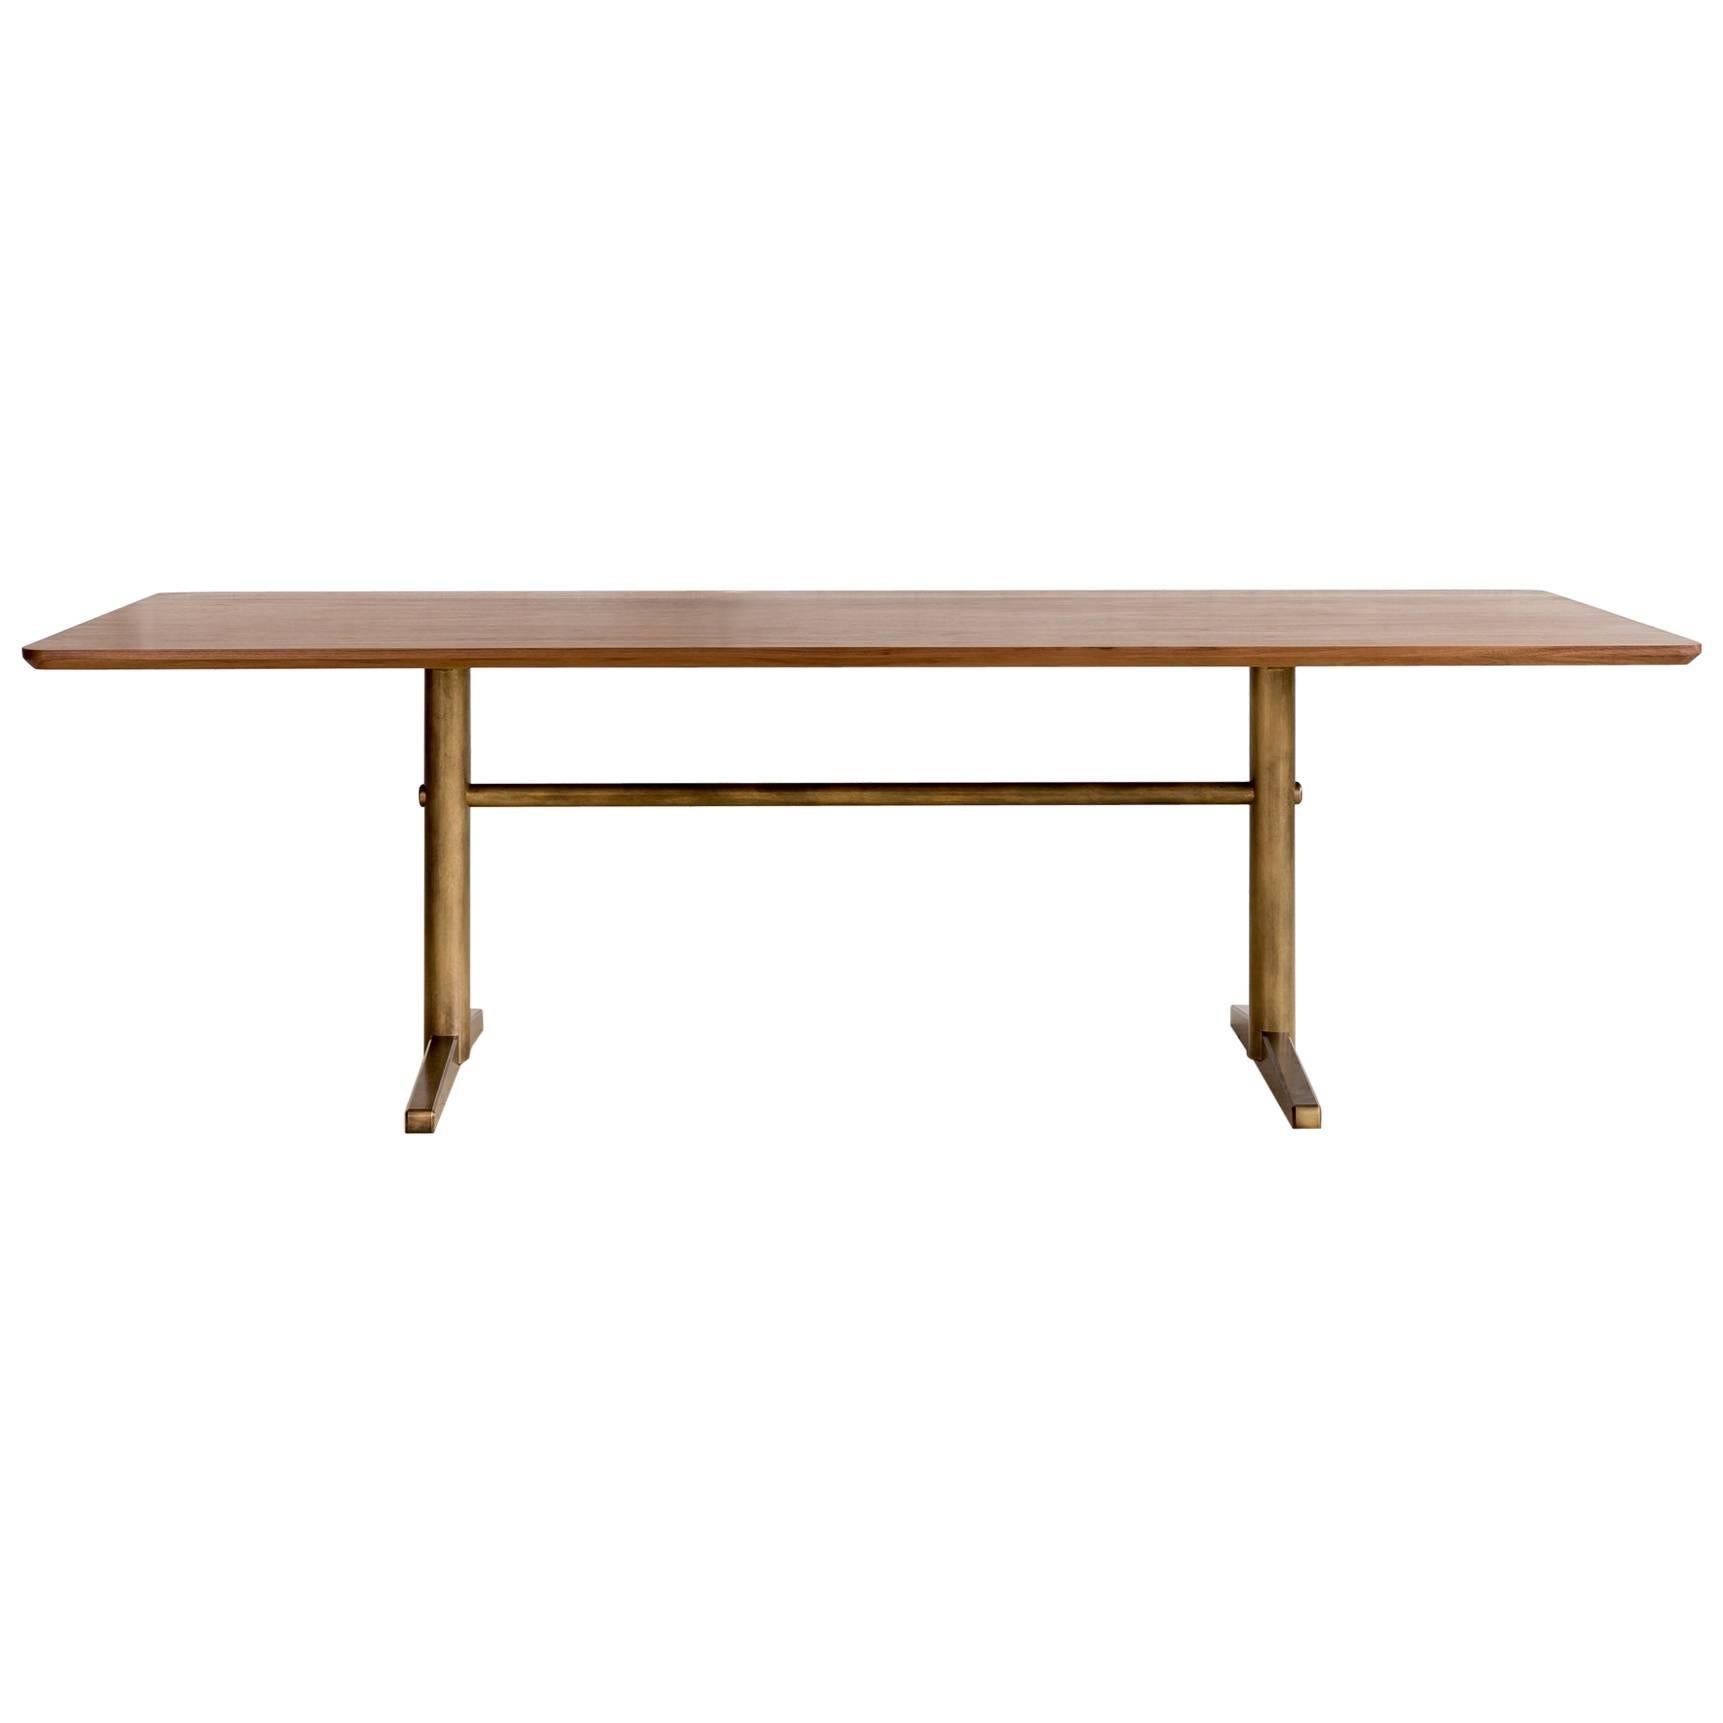 Pillar Dining Table in Walnut and Brushed Brass by Fort Standard